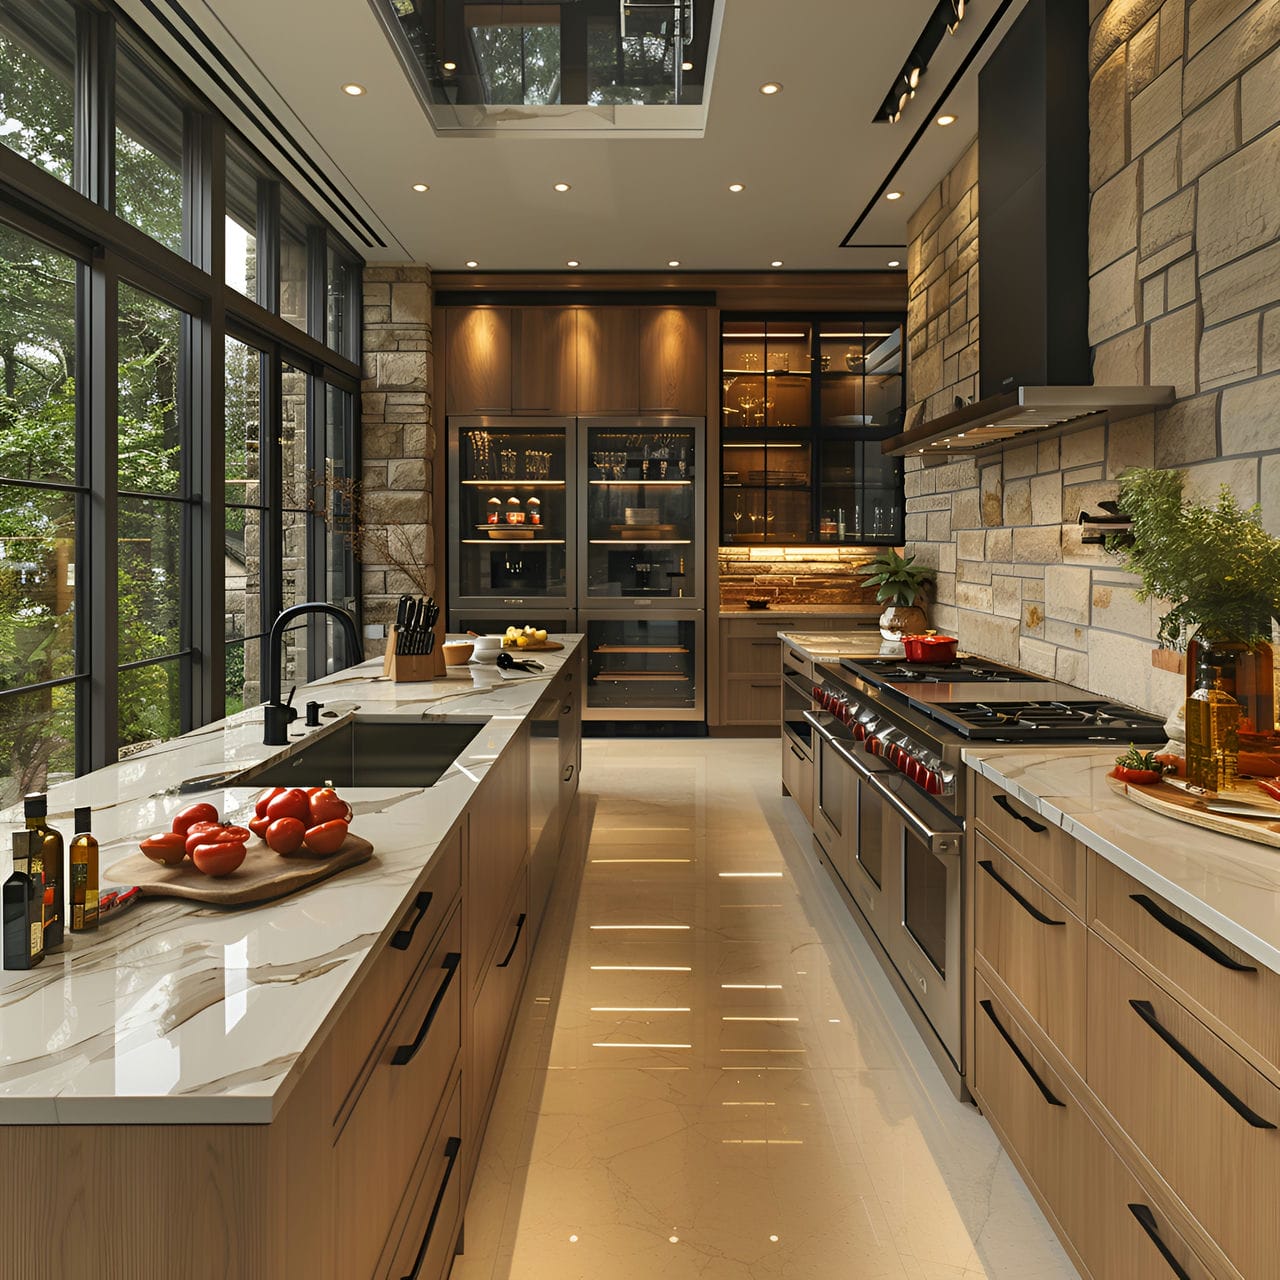 Kitchen: size, functionality, uses, furniture, and renovation